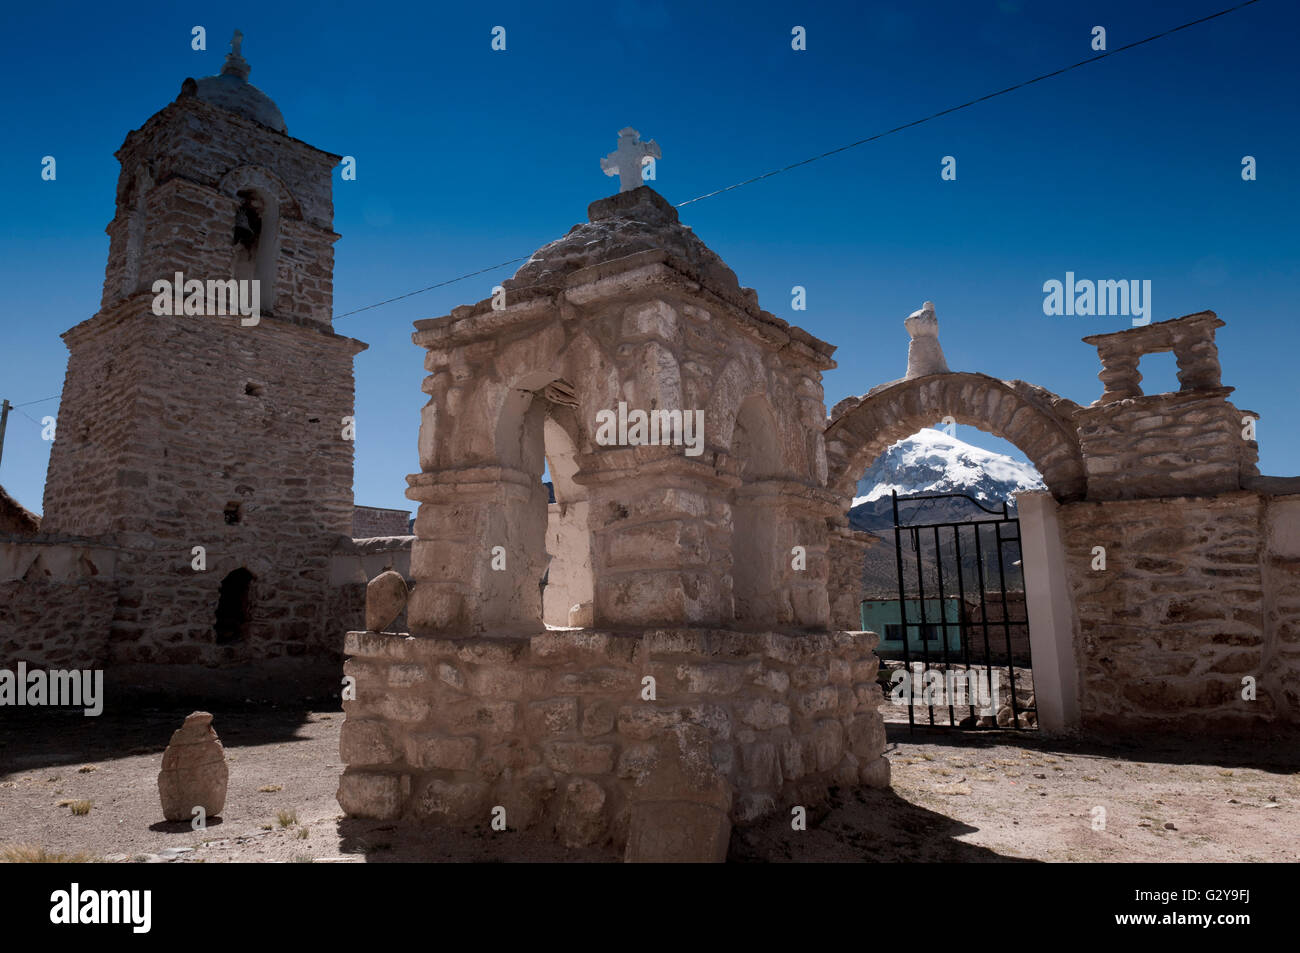 Sajama NP, Church Courtyard And Snow-Capped Volcano In The Background Stock Photo